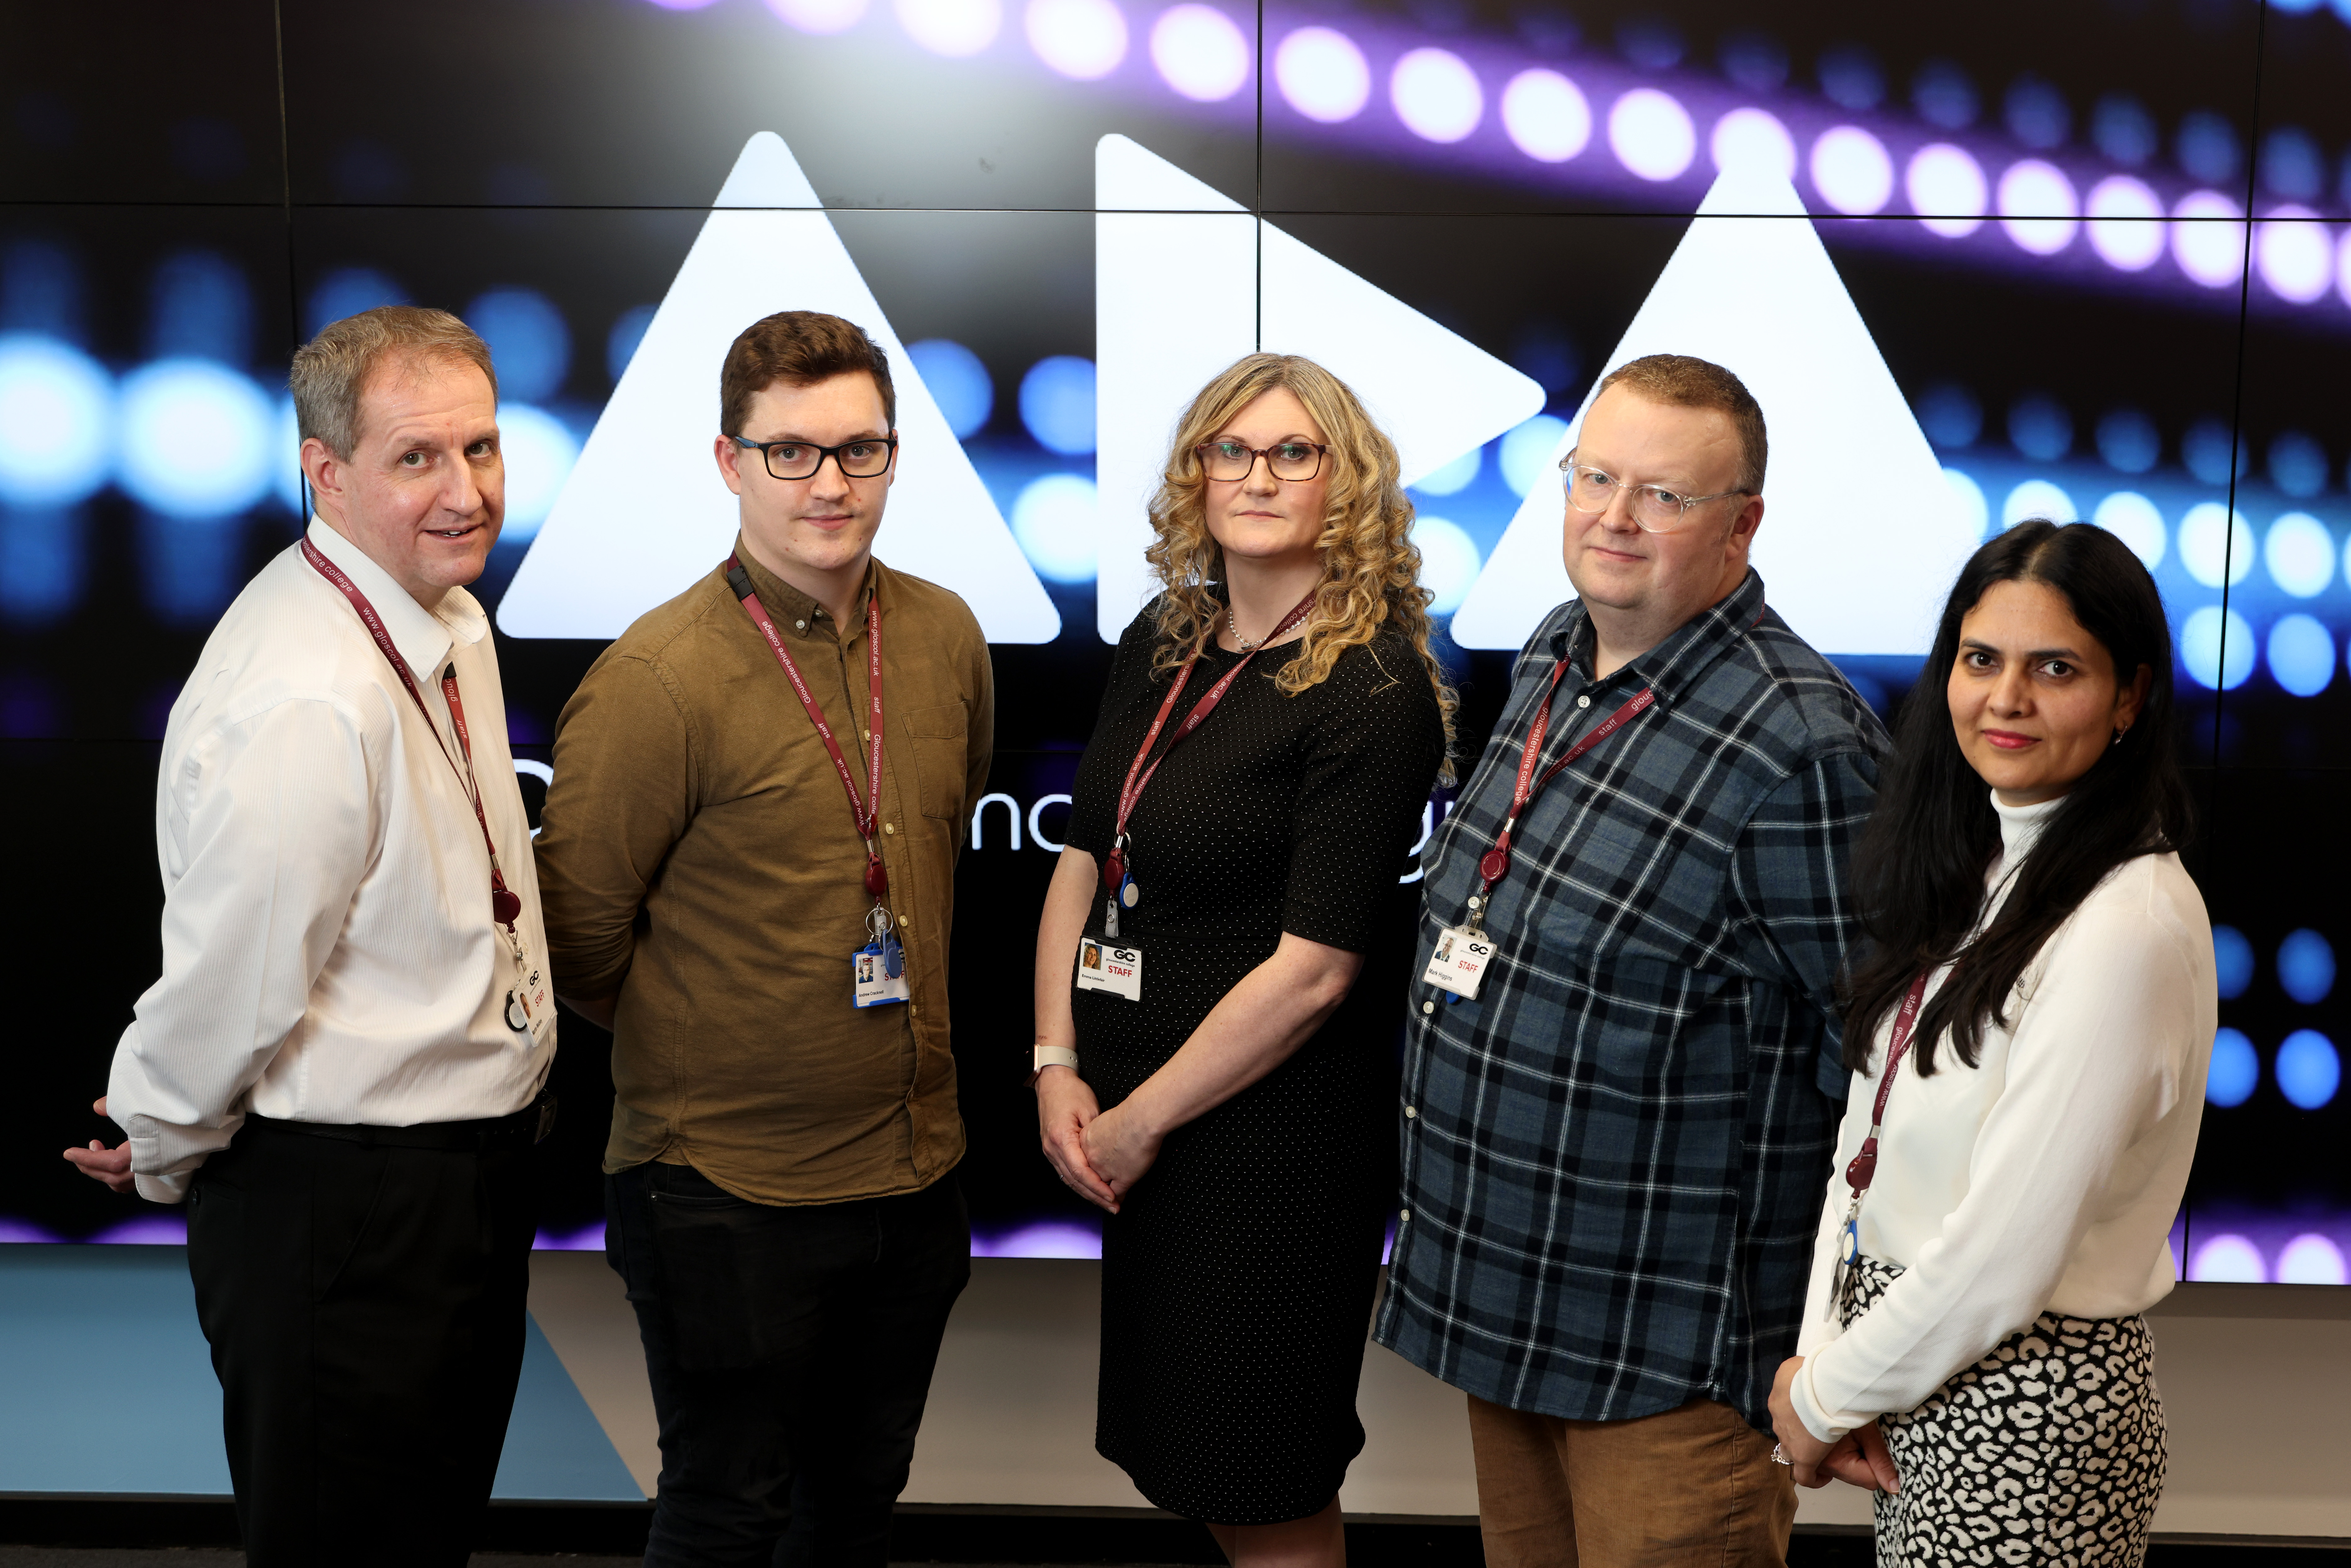 Introducing the IT and Cyber Security Apprenticeship Delivery Team at Gloucestershire College.